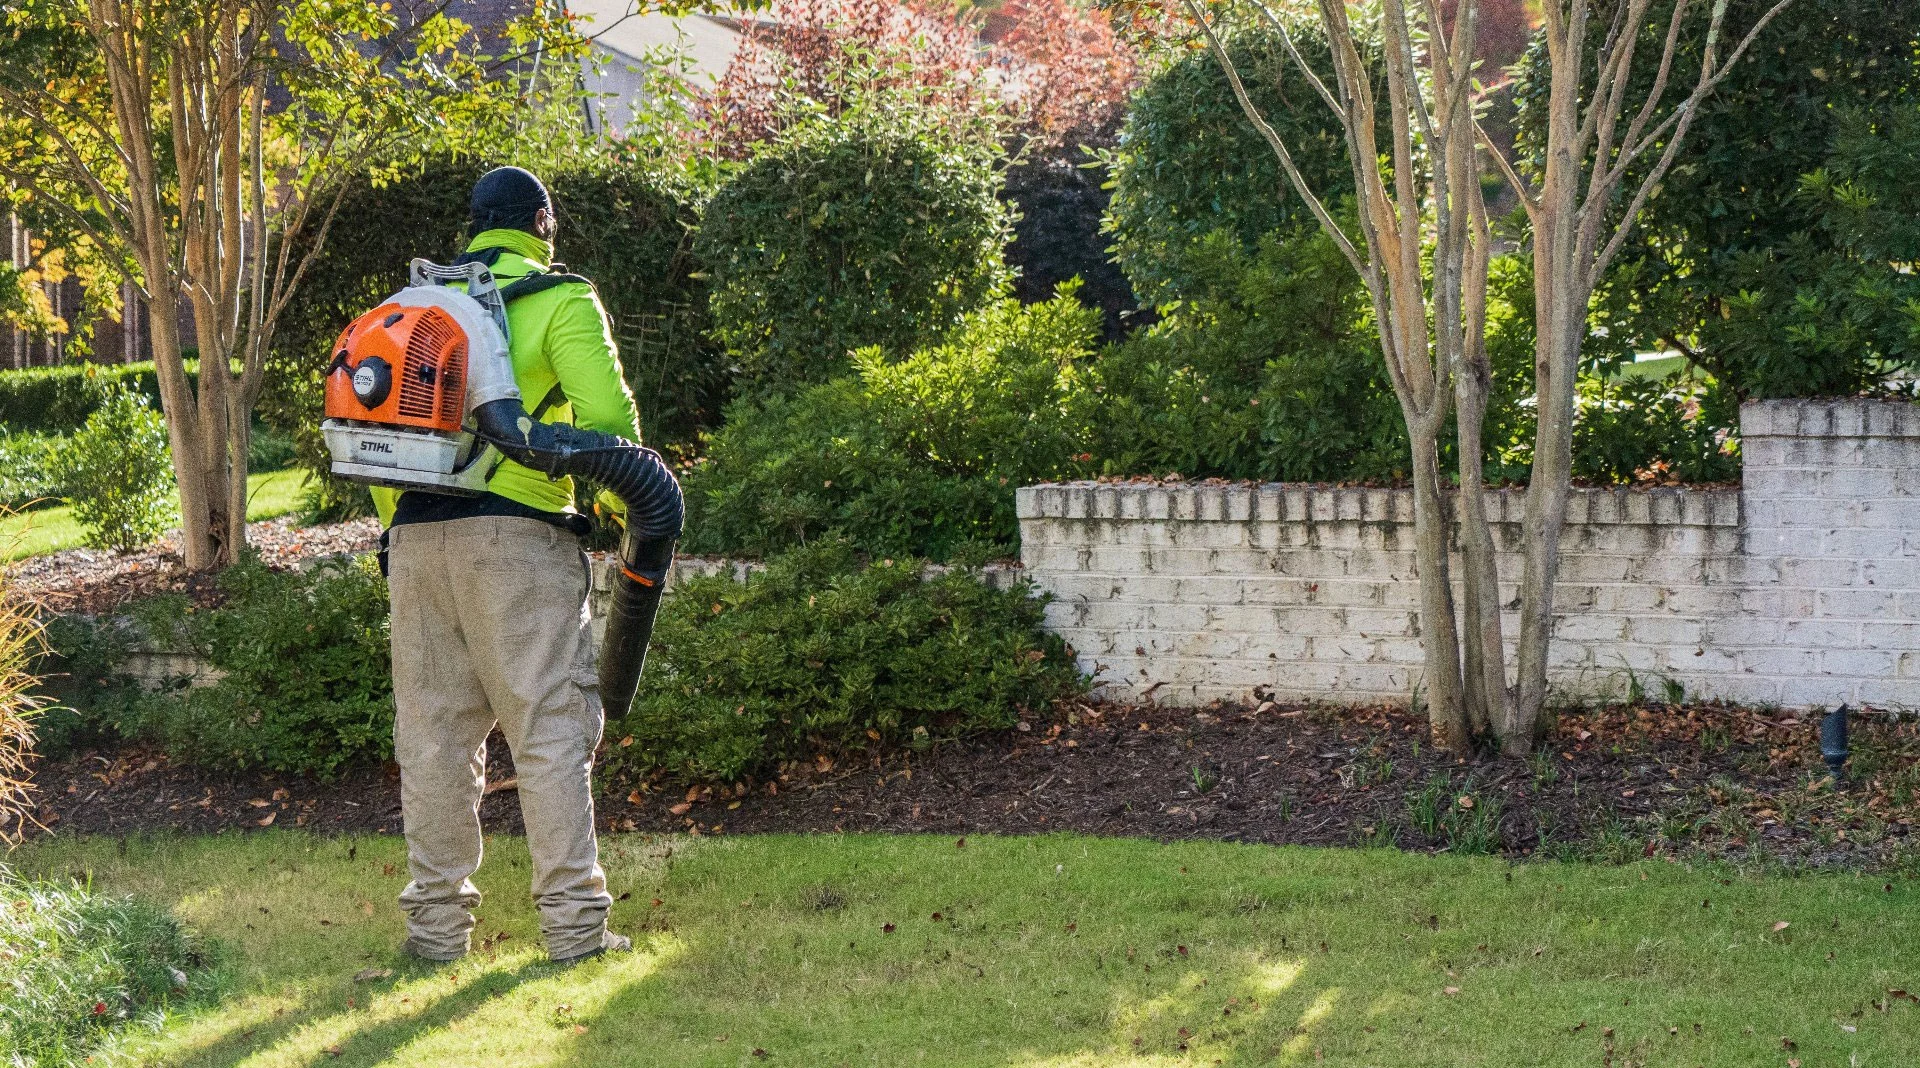 How Much Will It Cost to Schedule a Fall Yard Cleanup Service?